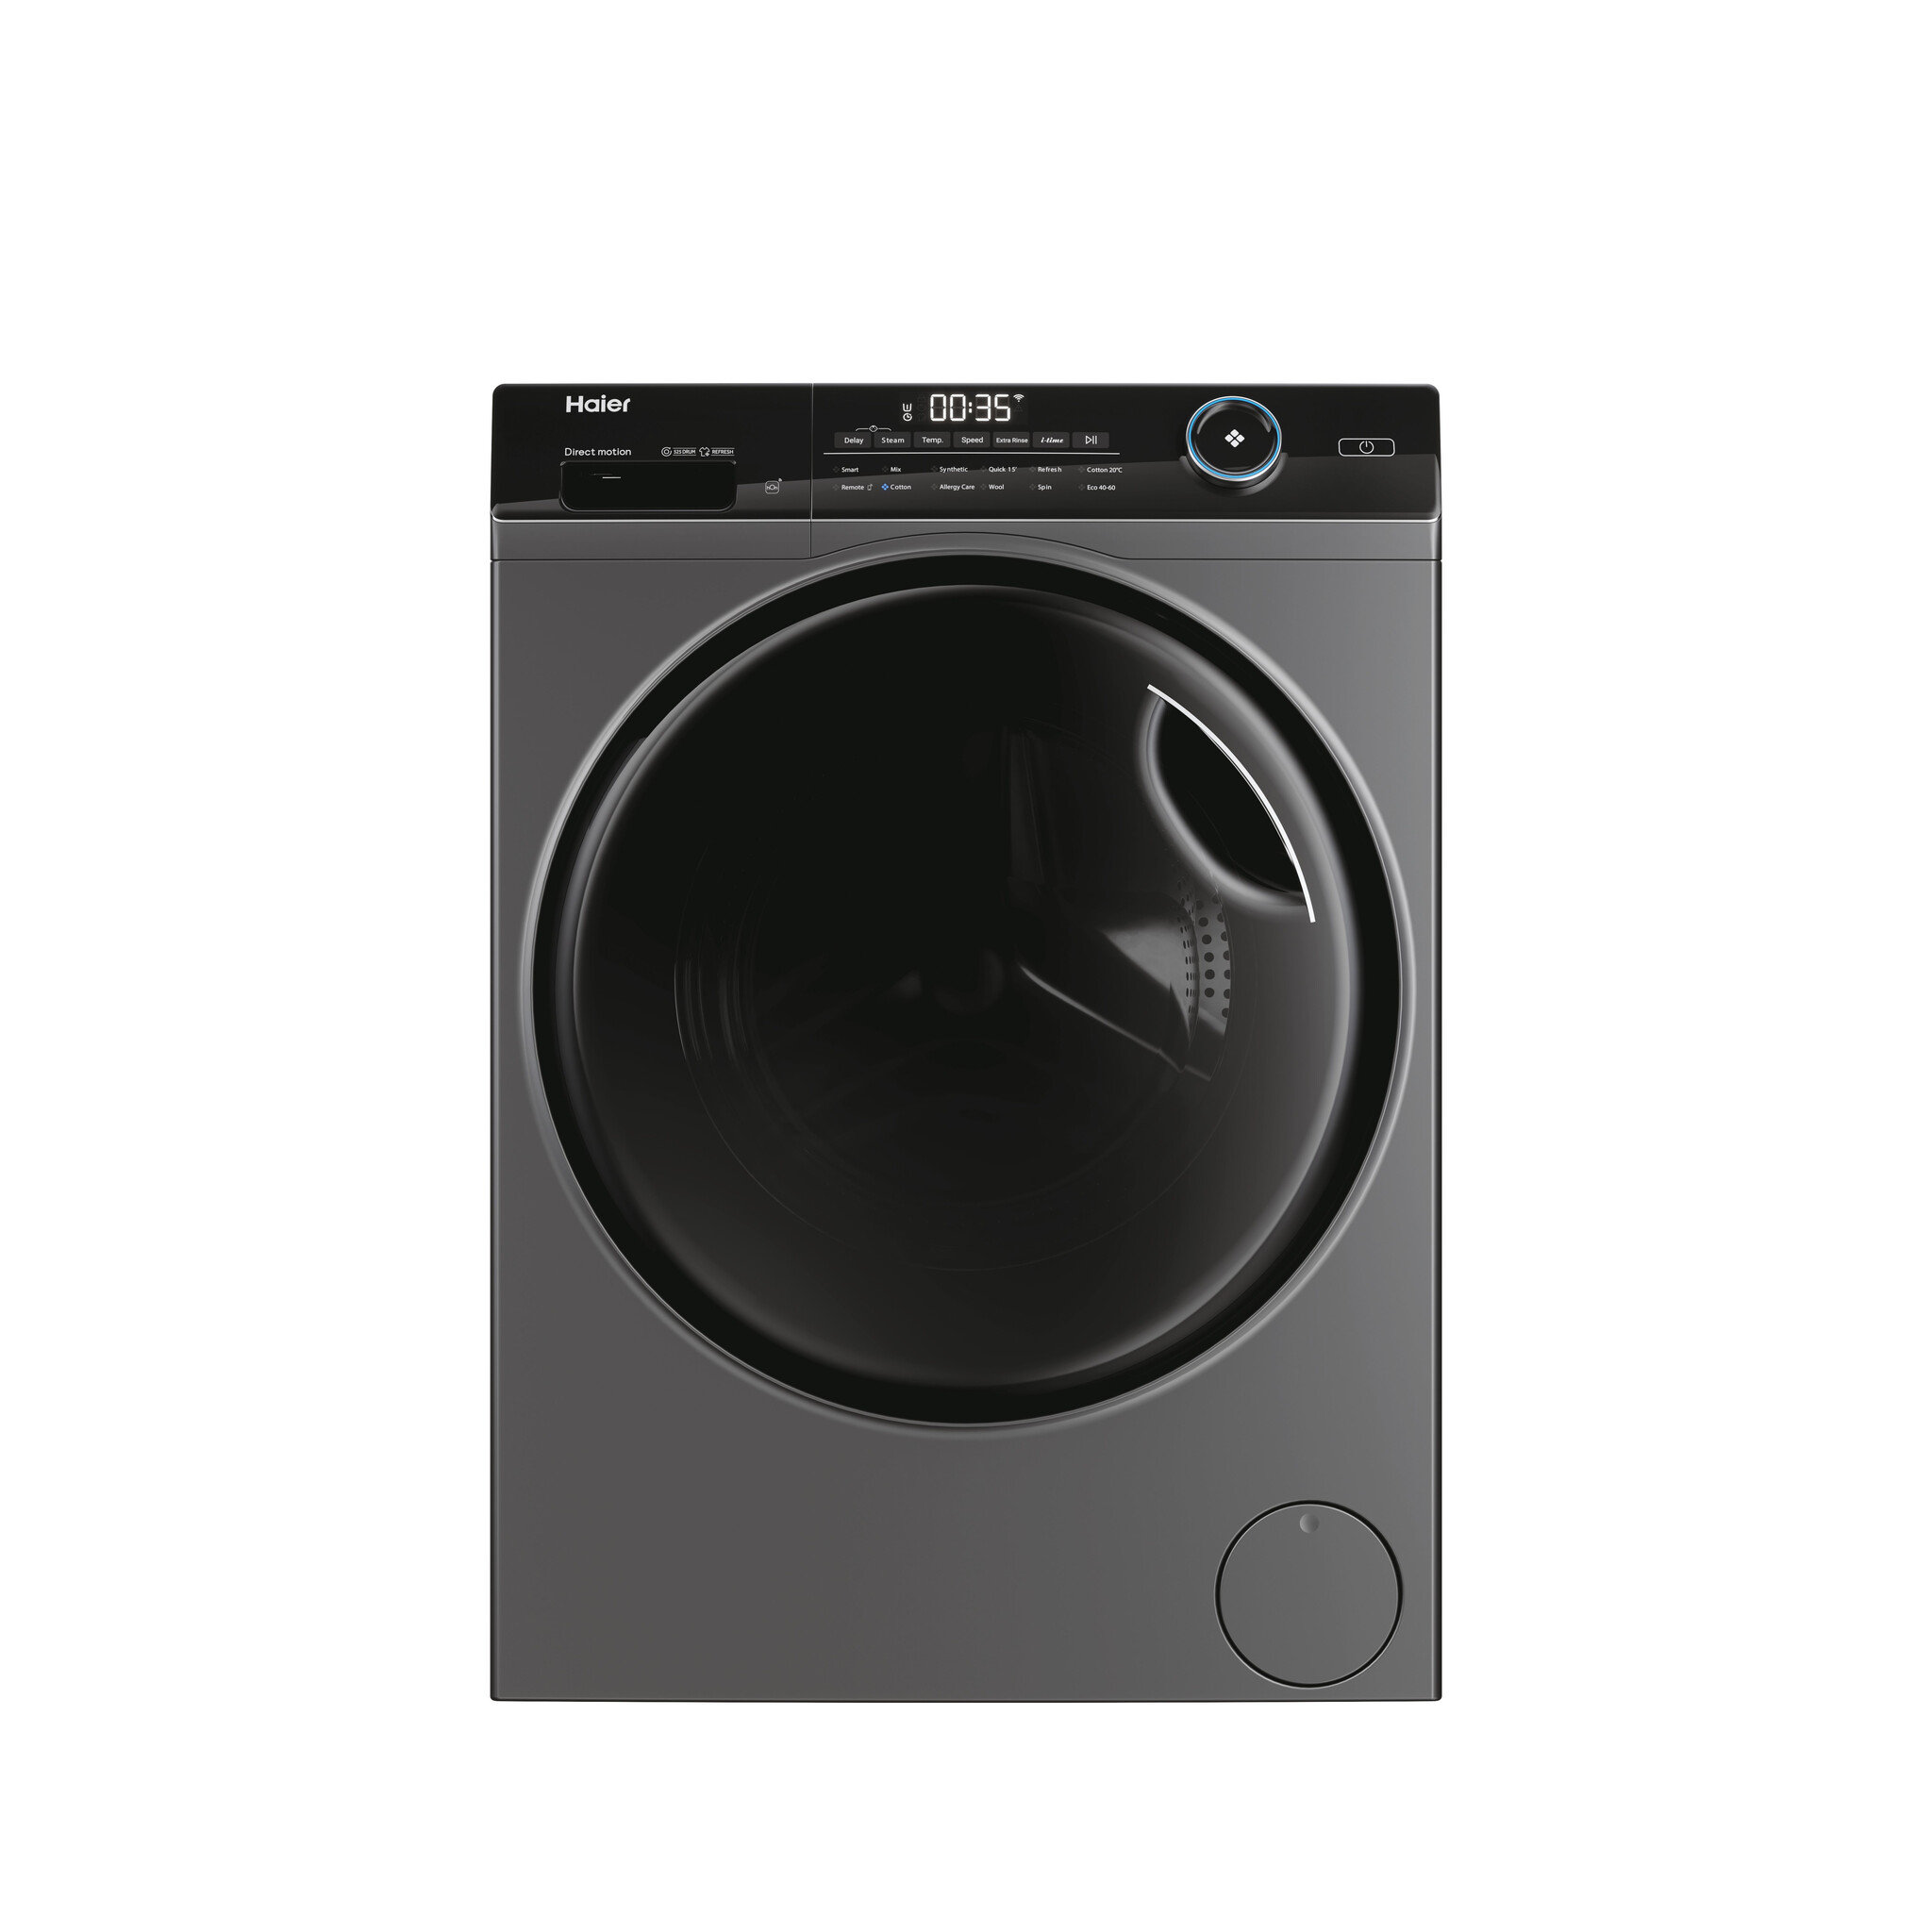 Haier i-Pro Series 5 HW80-B14959S8TU1 8Kg Washing Machine with 1400 rpm – Anthracite – A Rated #366802